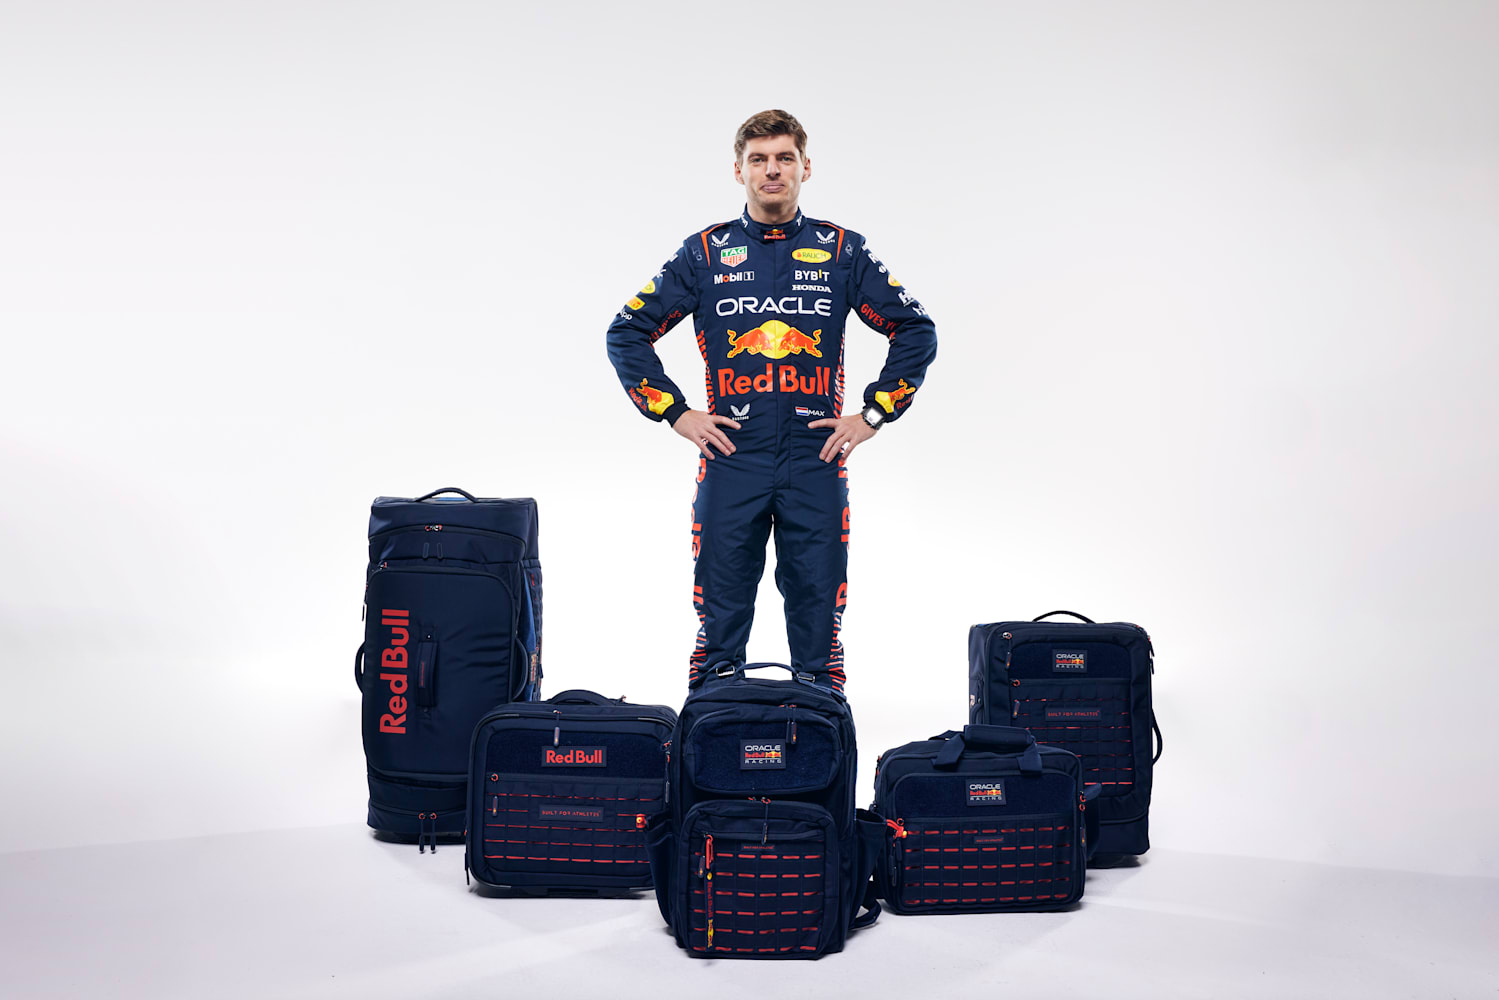 Built Athletes™ Joins Oracle Red Bull Racing